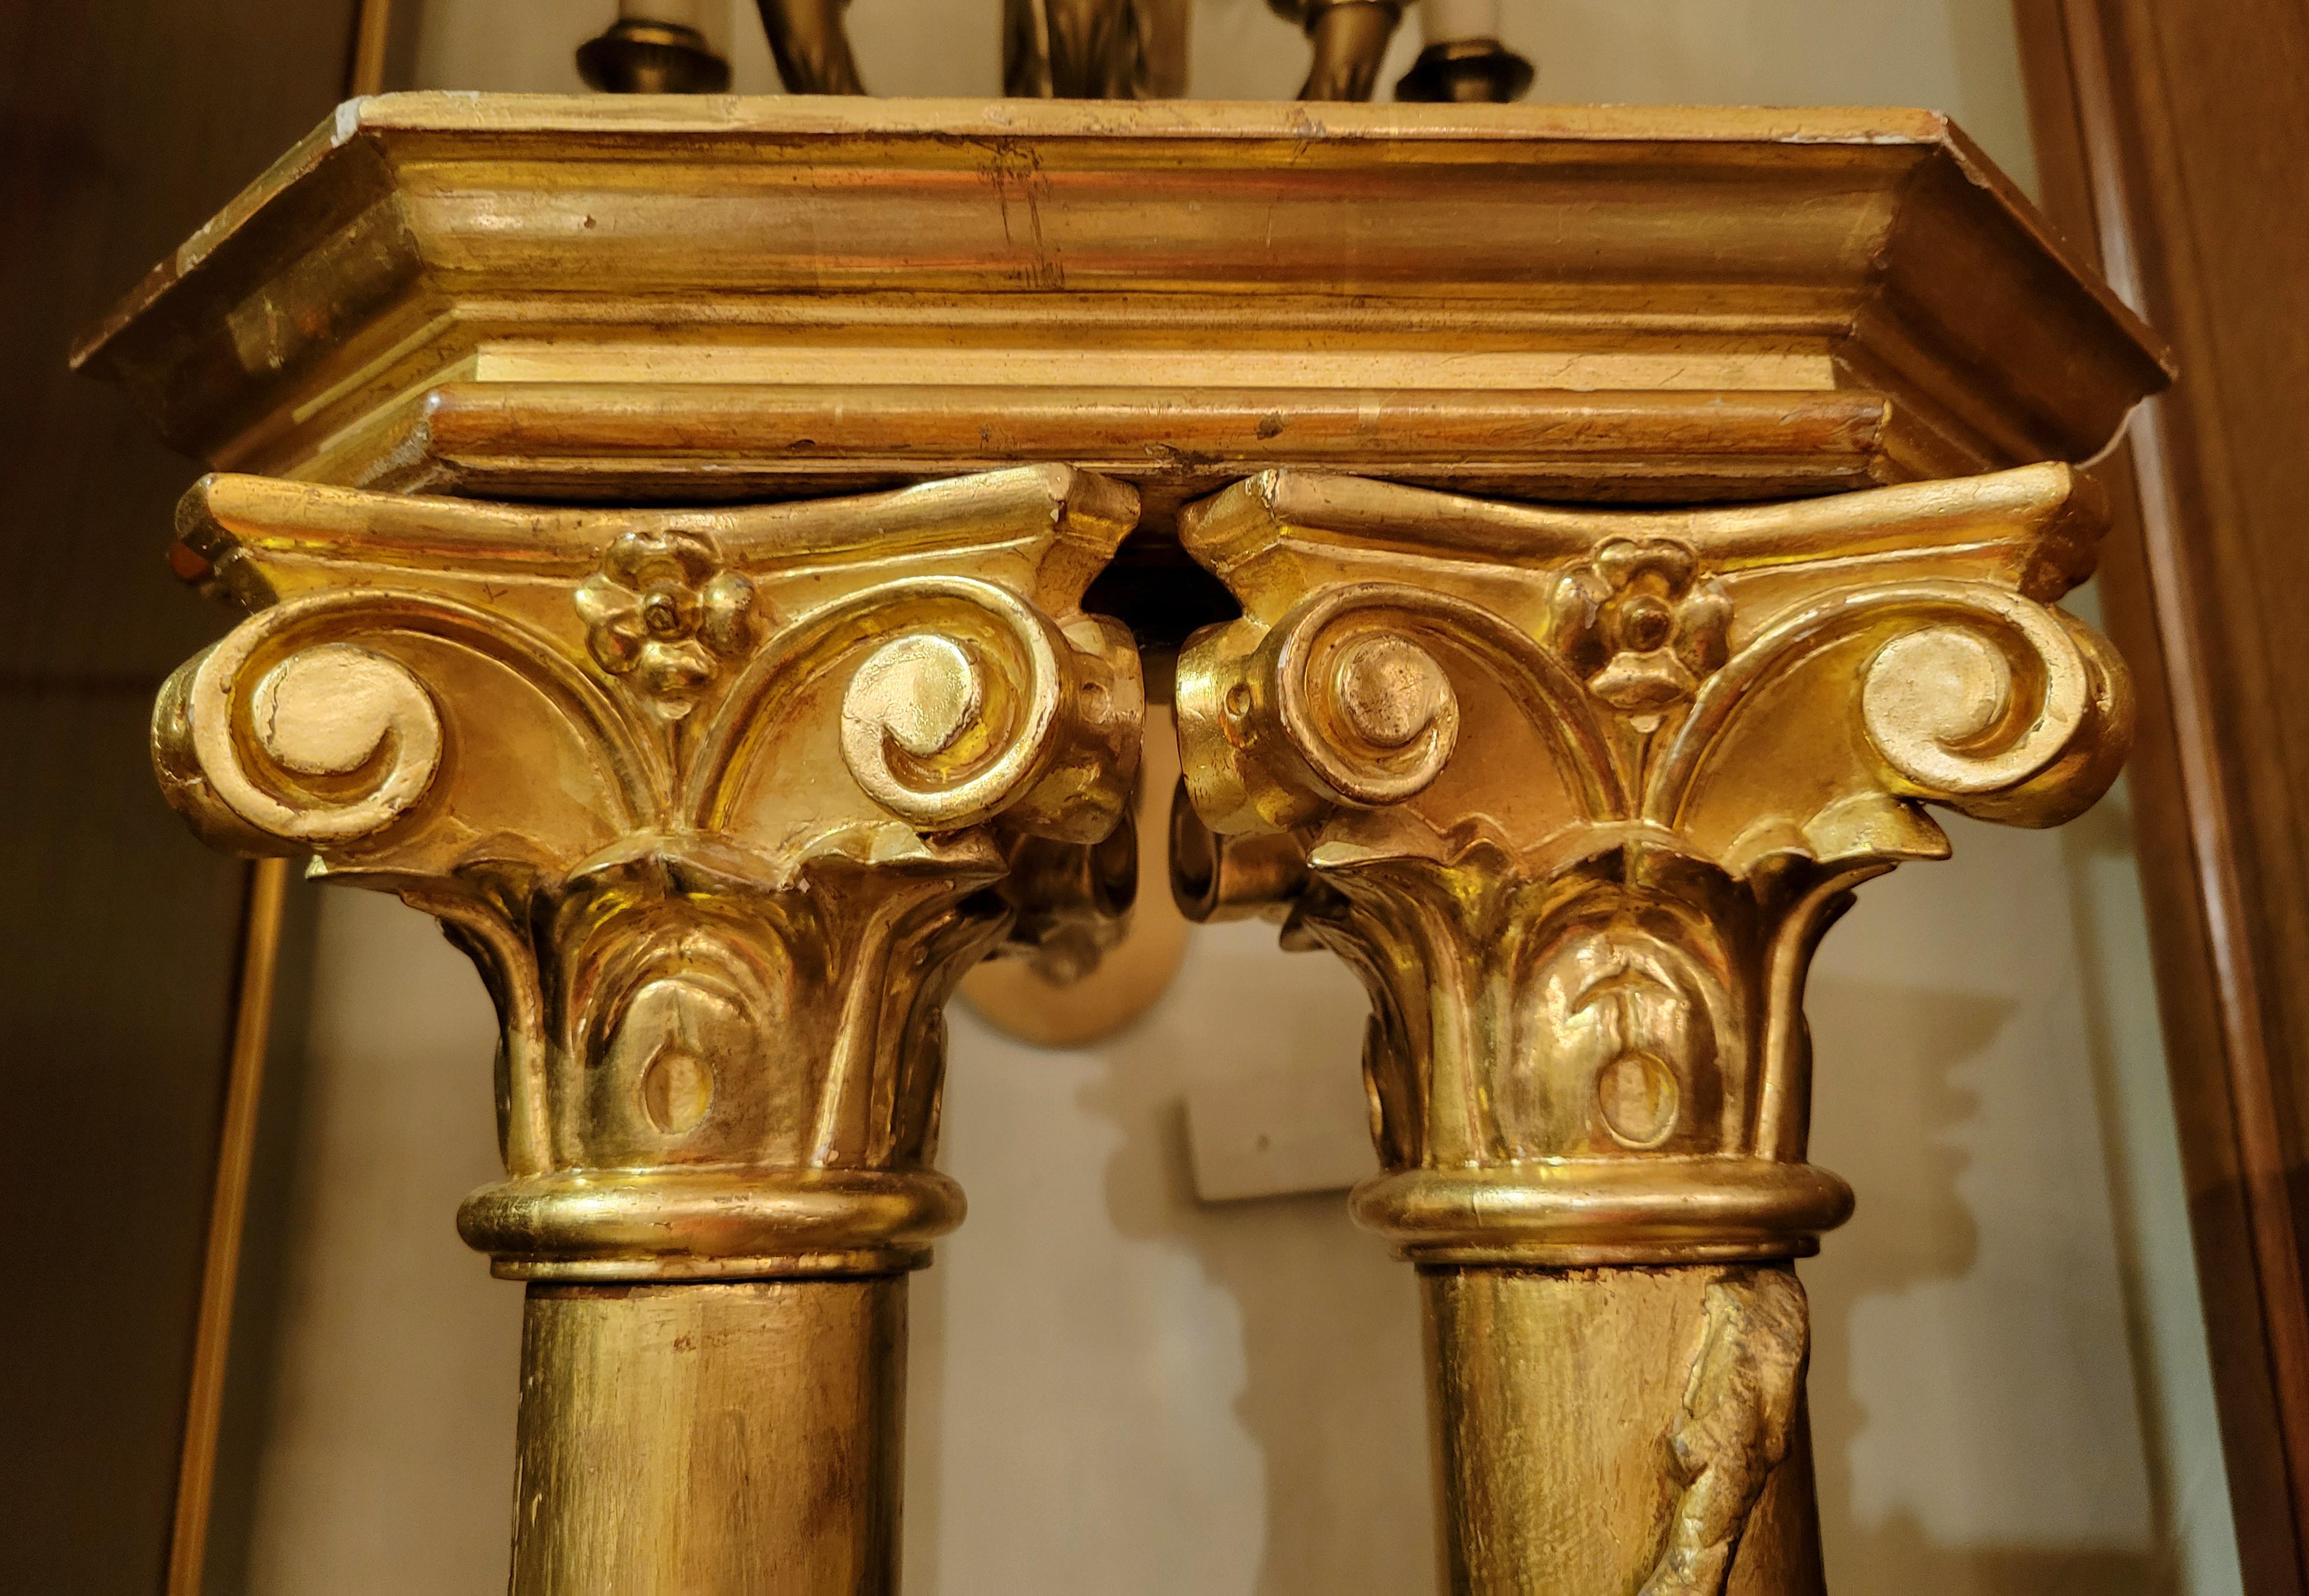 Set of 4 antique 19th century Florentine Gold Columns circa 1850. These are lovely old columns and stand quite tall. We are willing to break the set of four and allow purchase of two as shown in the pricing.